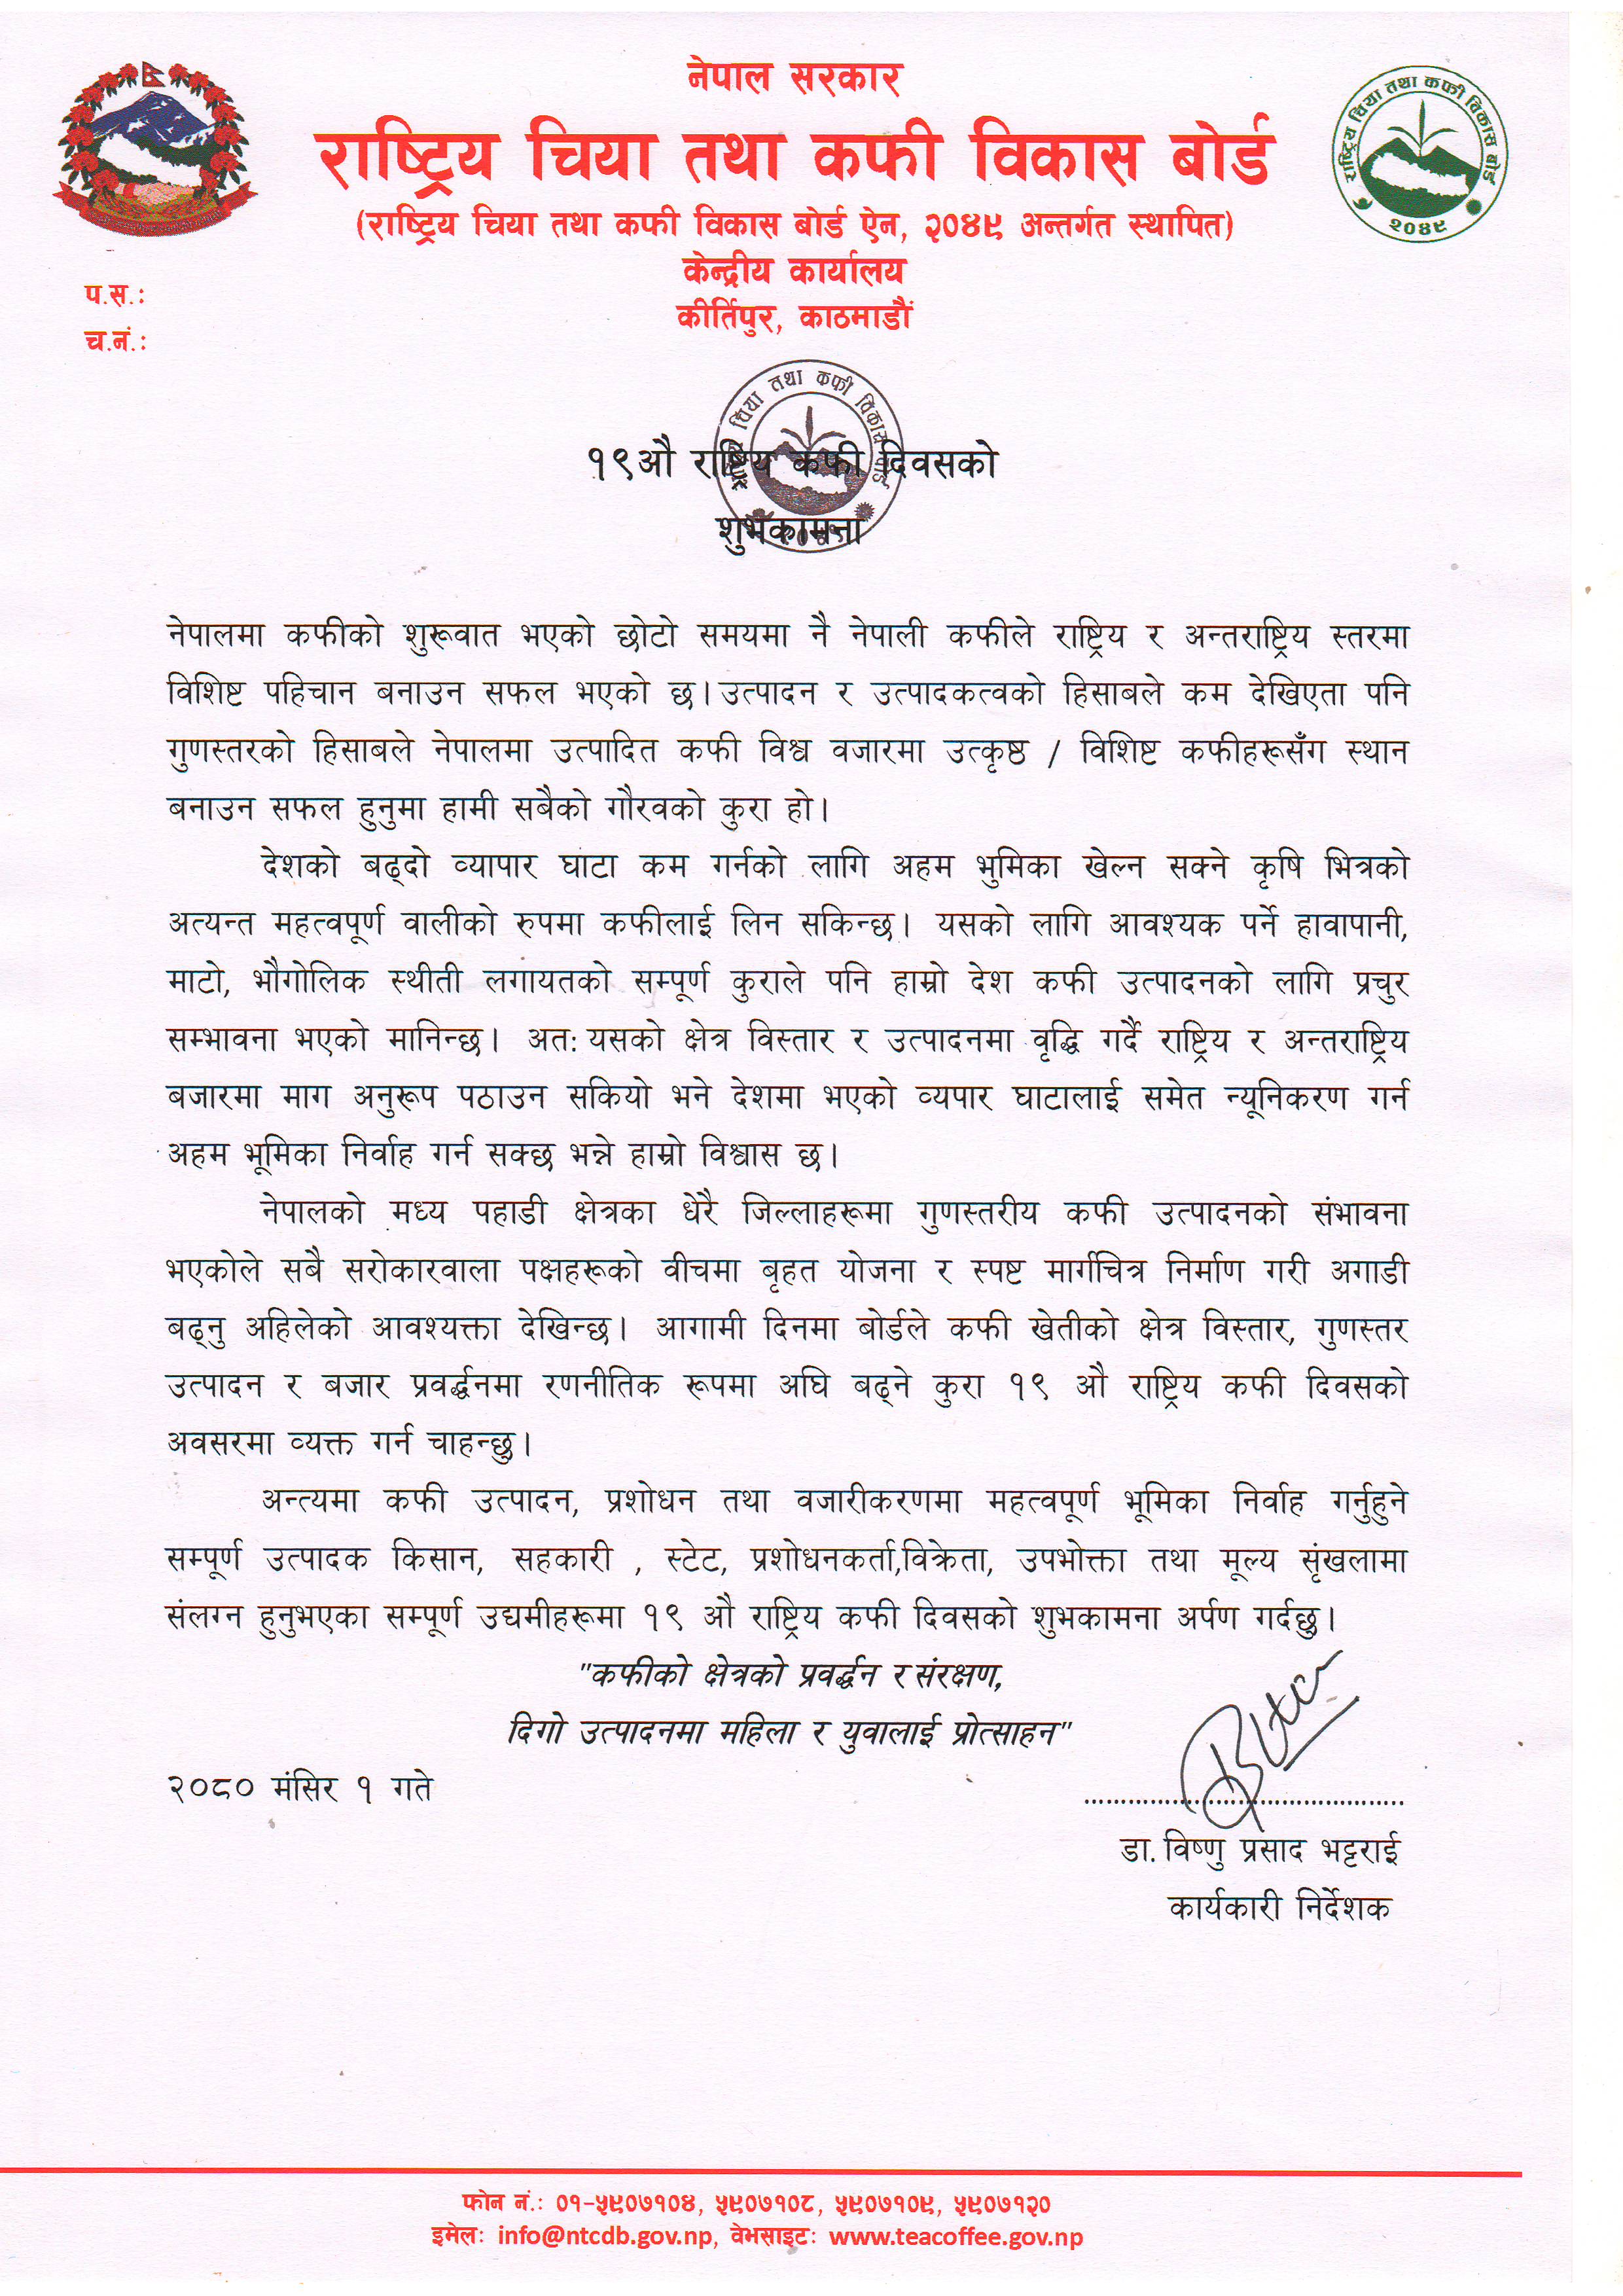 Message of Executive Director on the occasion of 19th National Coffee Day.